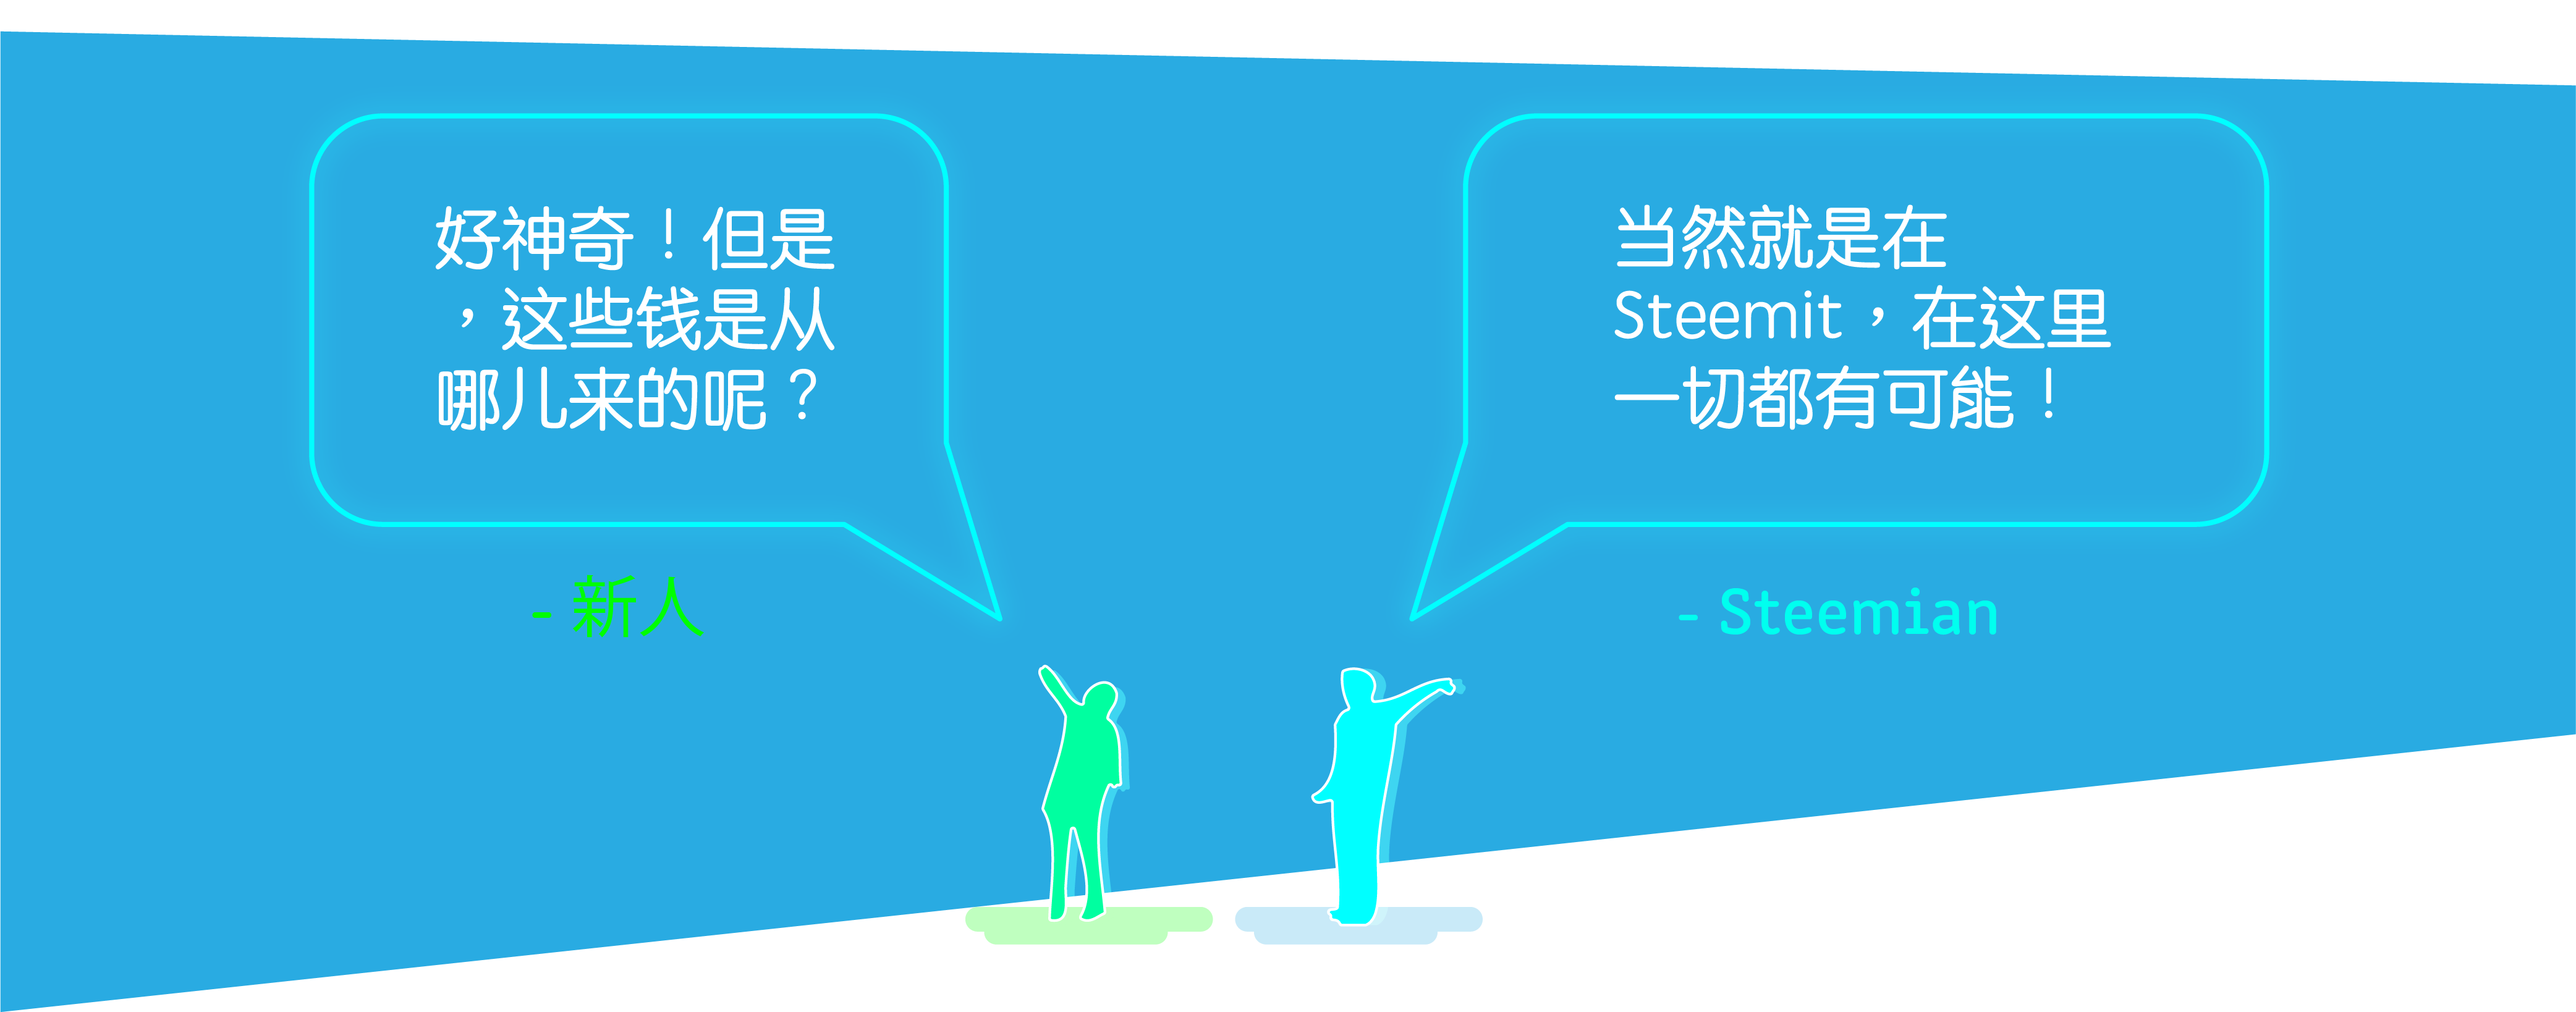 171004_ Chinese Welcome-to-Steemit-03.png